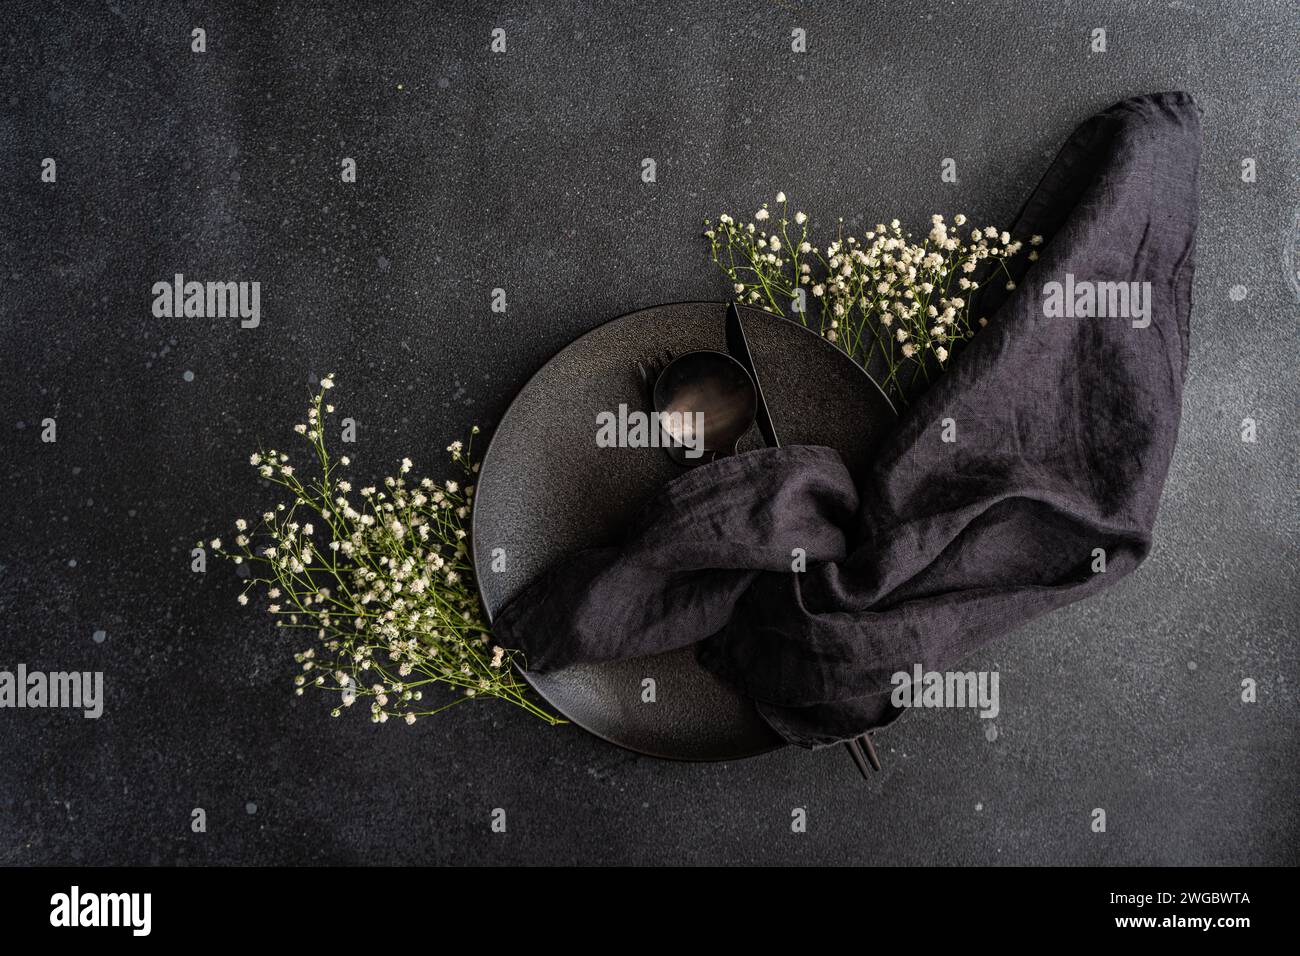 Overhead view of a black place setting with white gypsophila flowers on a black background Stock Photo